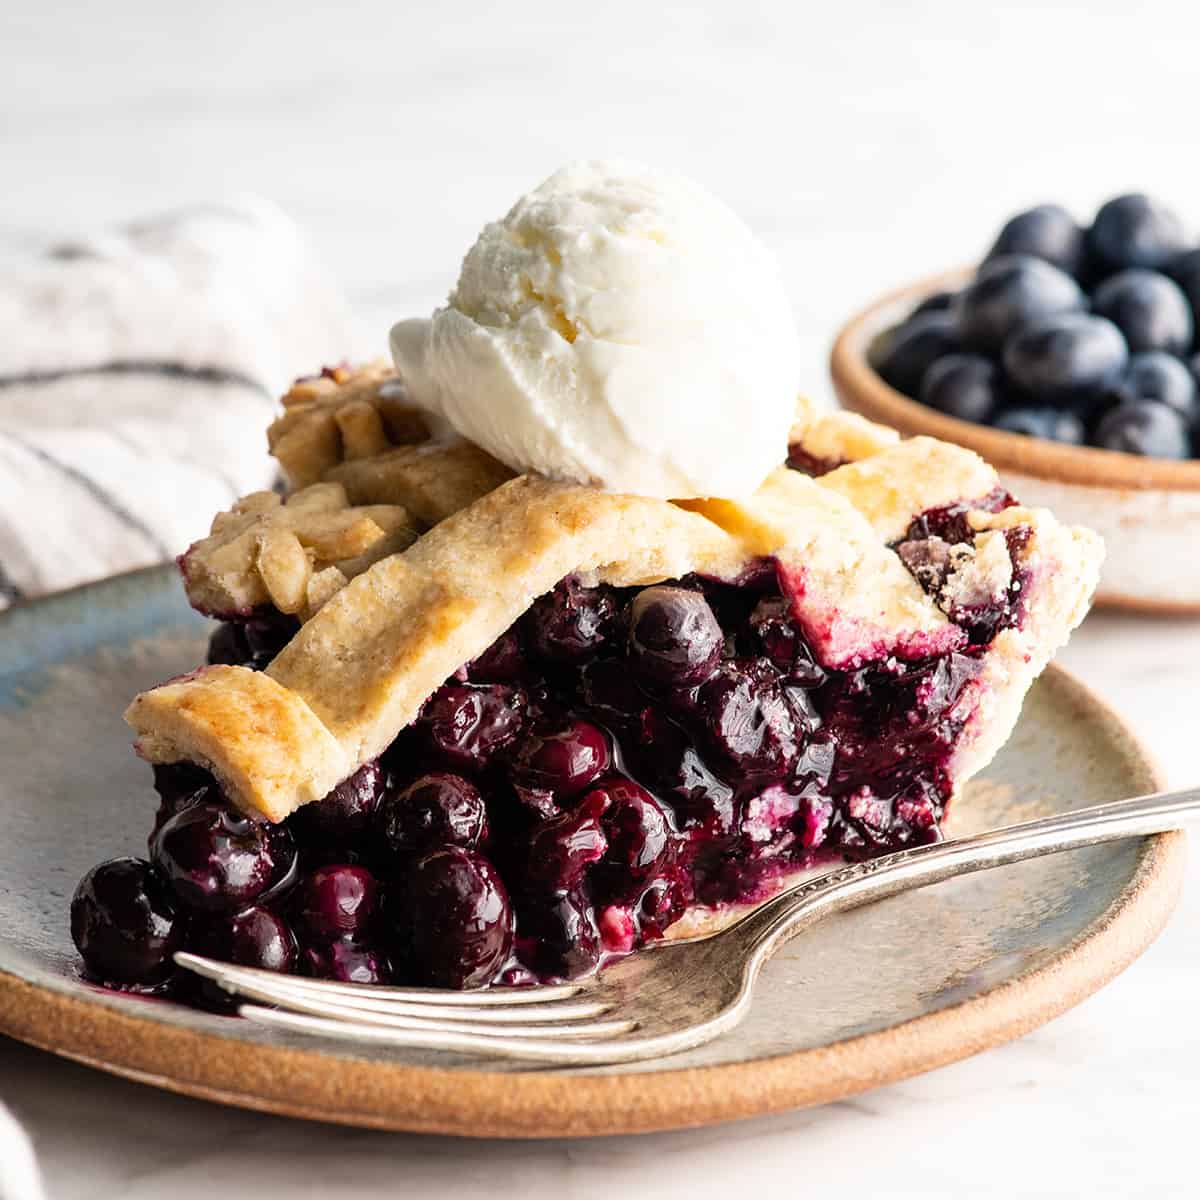 front view of a slice of blueberry pie with a scoop of vanilla ice cream on top